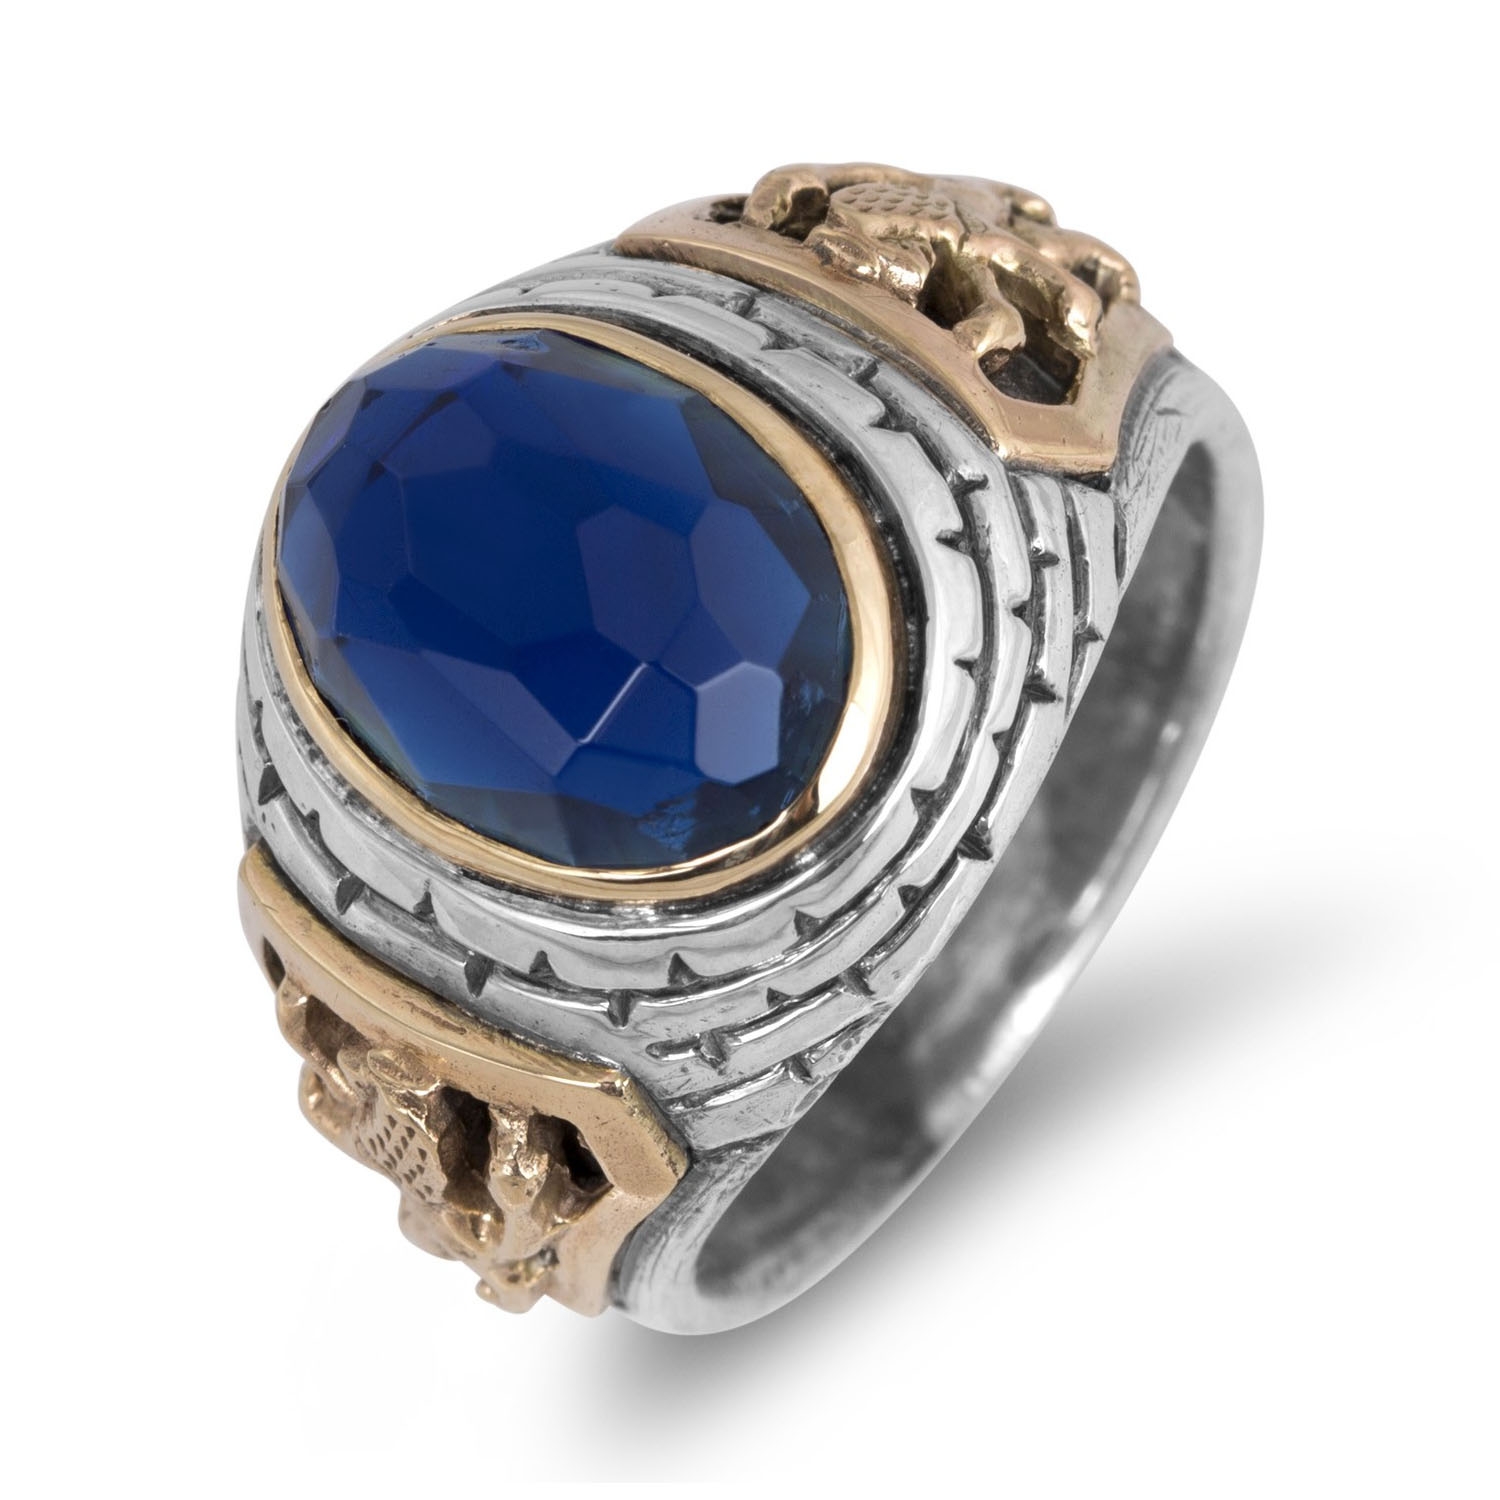 Sterling Silver Ring with 9K Gold Lions of Judah and Sapphire - 1